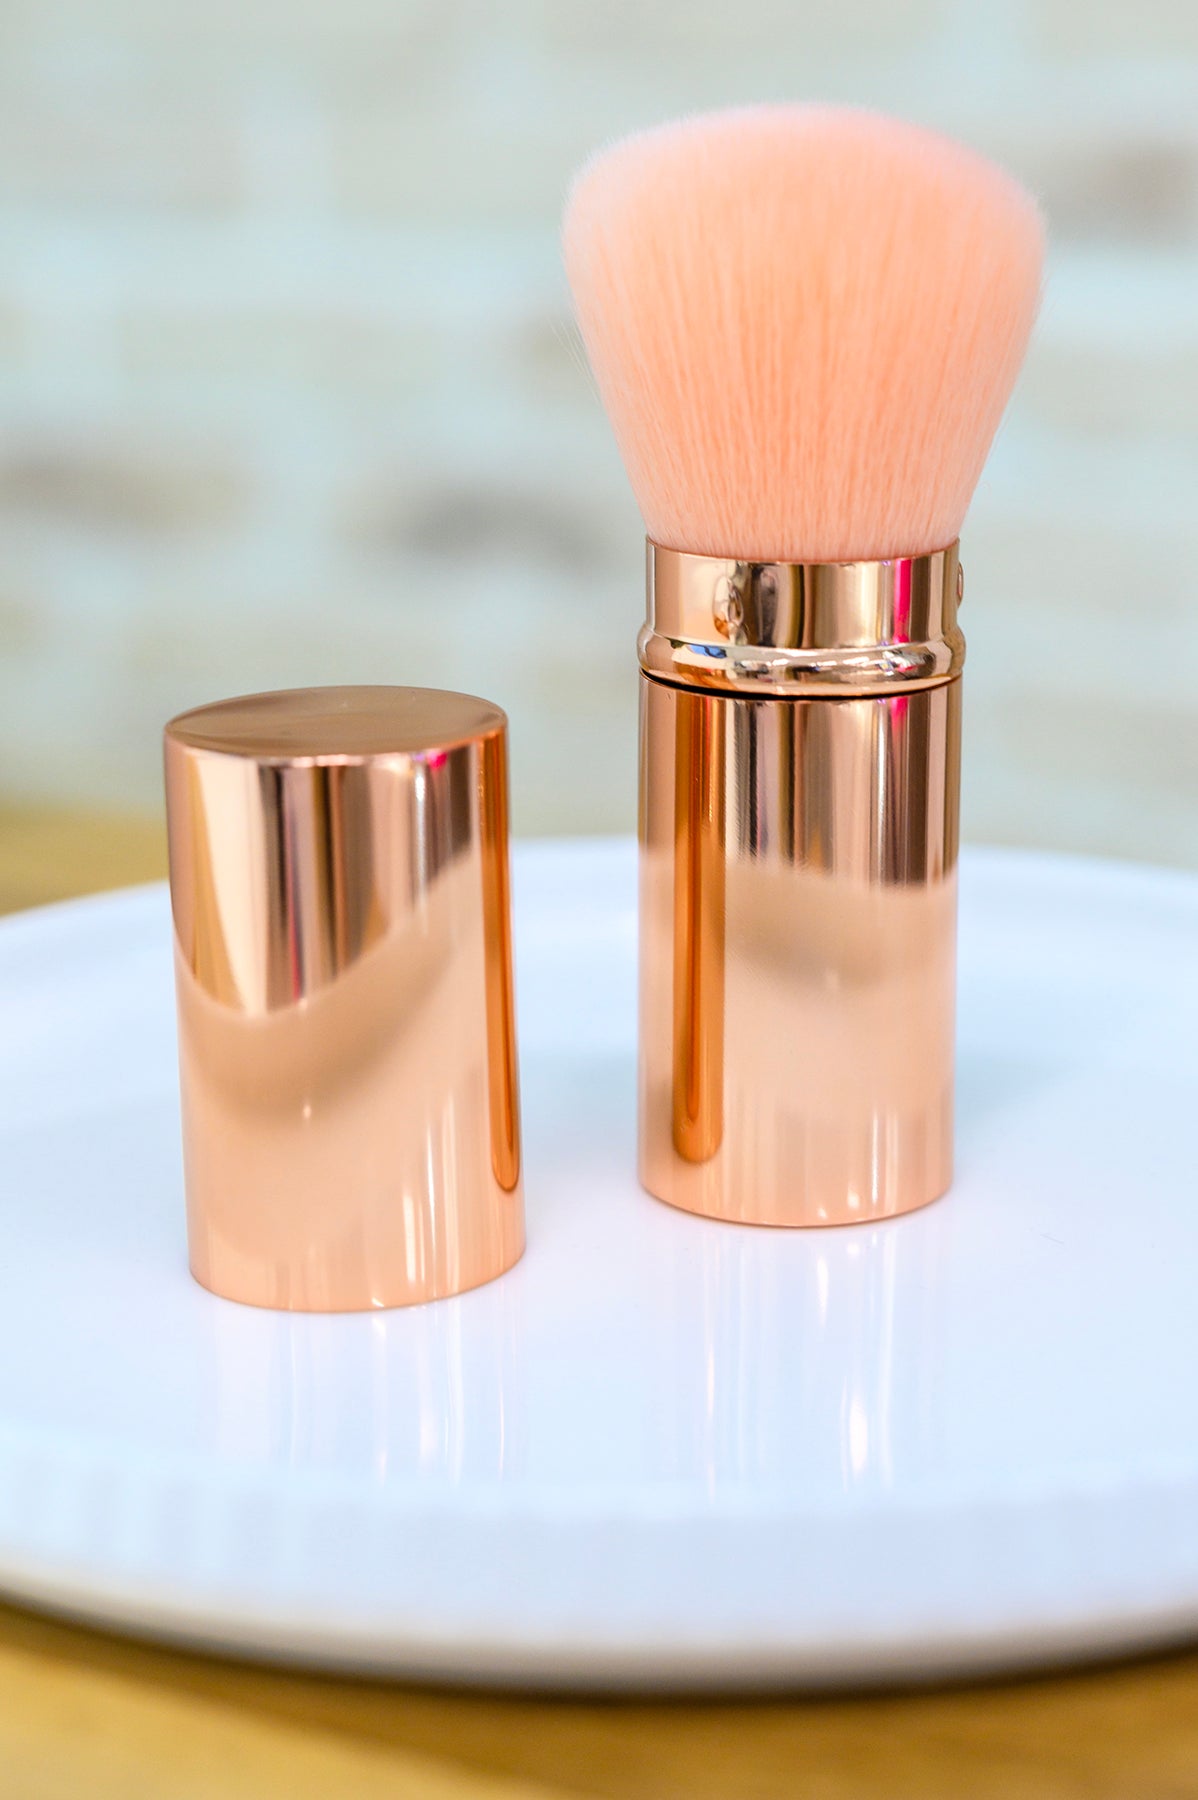 A rose gold Telescopic Powder Brush with a matching cap from The Dapper Squirrel is placed upright on a white plate. The brush, featuring soft, pink synthetic bristles, has the cap positioned next to it. The background is softly blurred, highlighting the brush as the focal point.